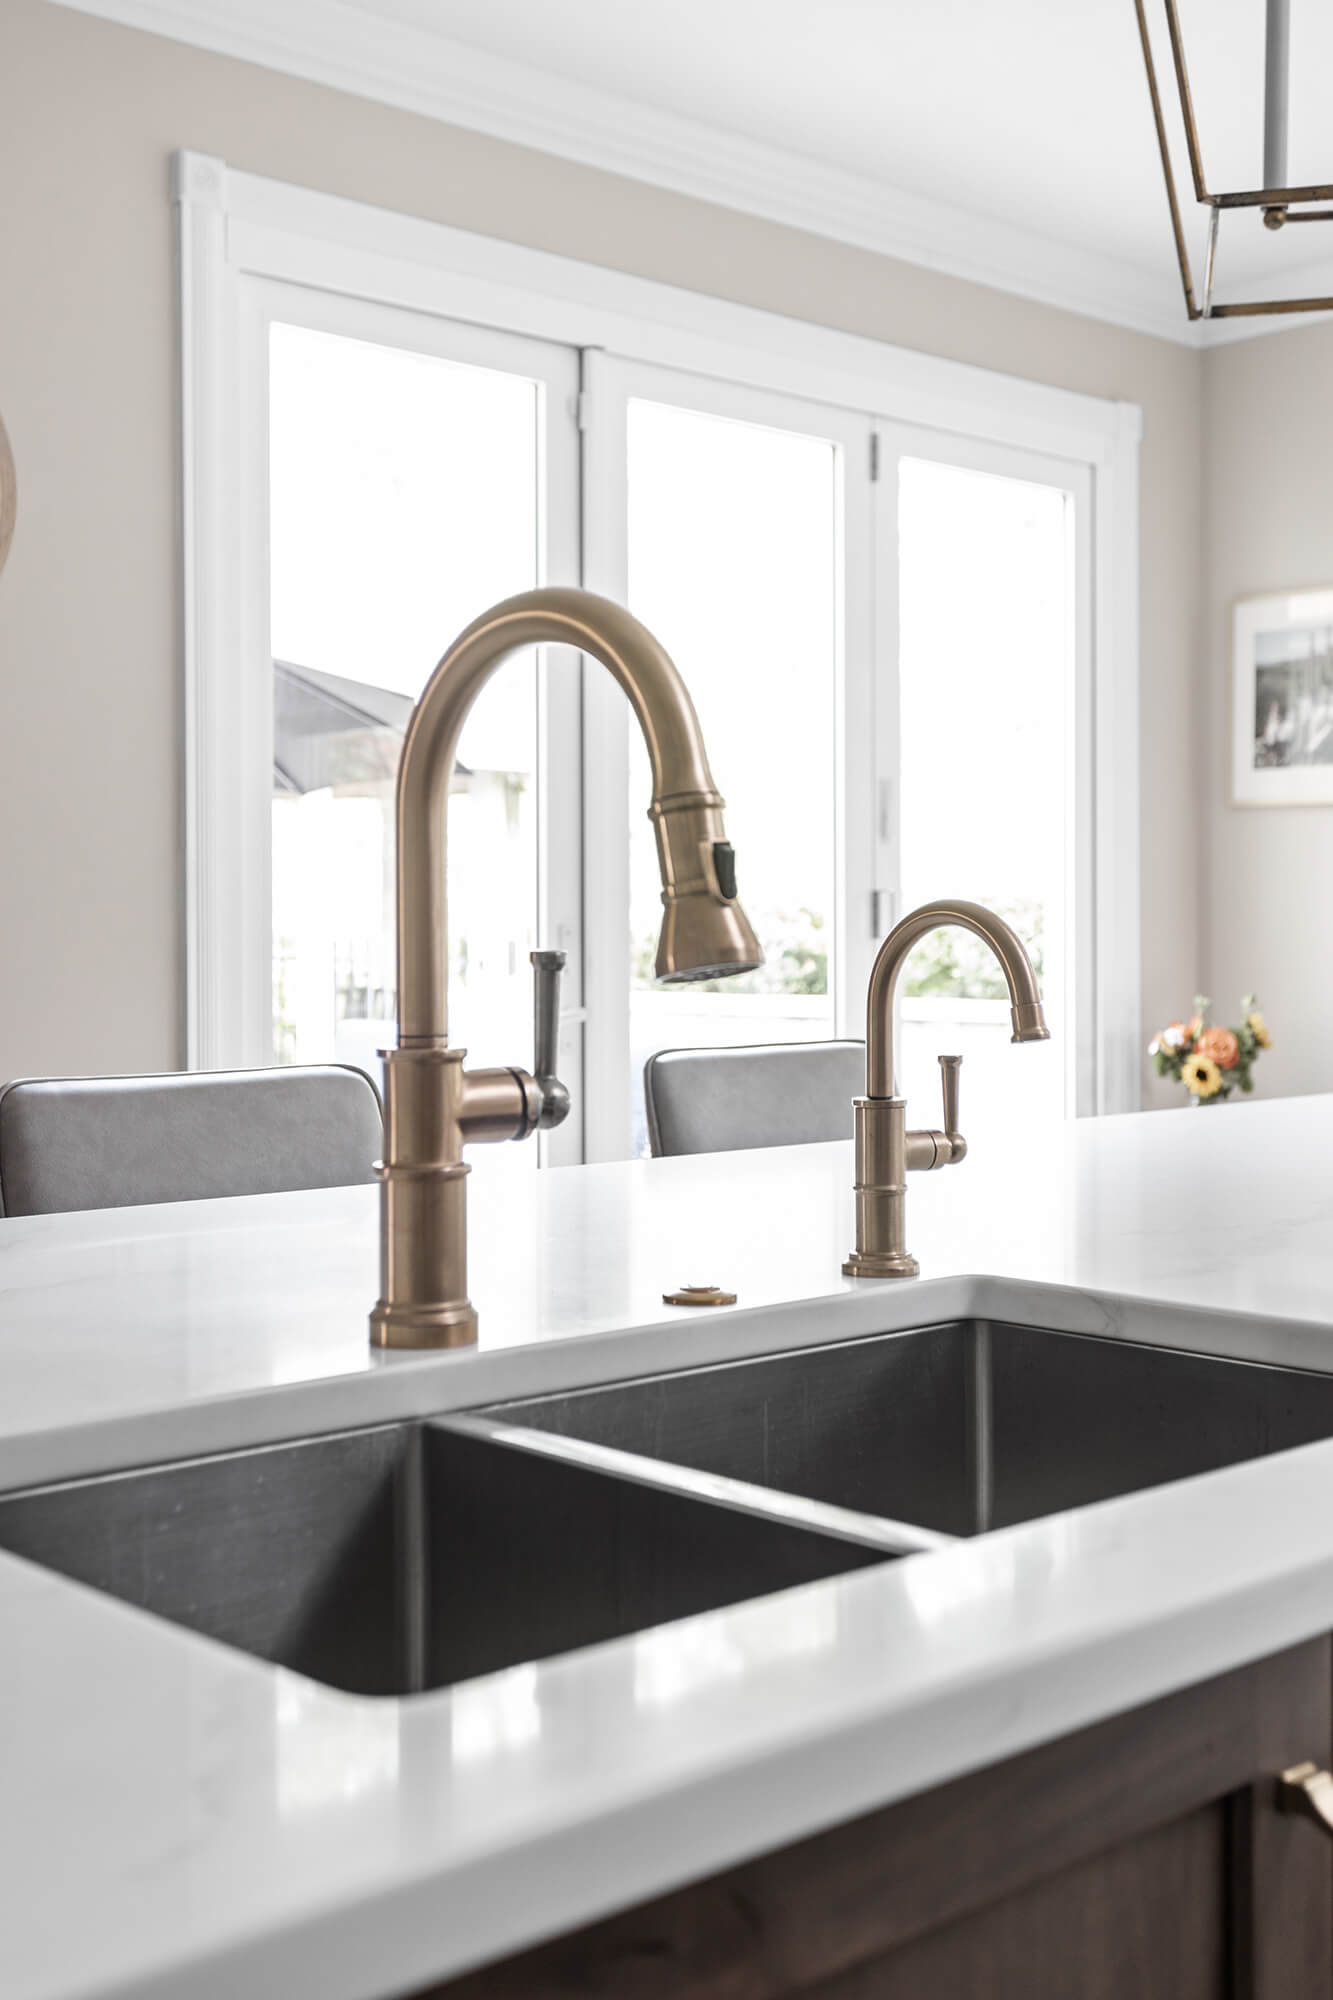 The double sink at the kitchen island has a brushed brass finish on the faucet.